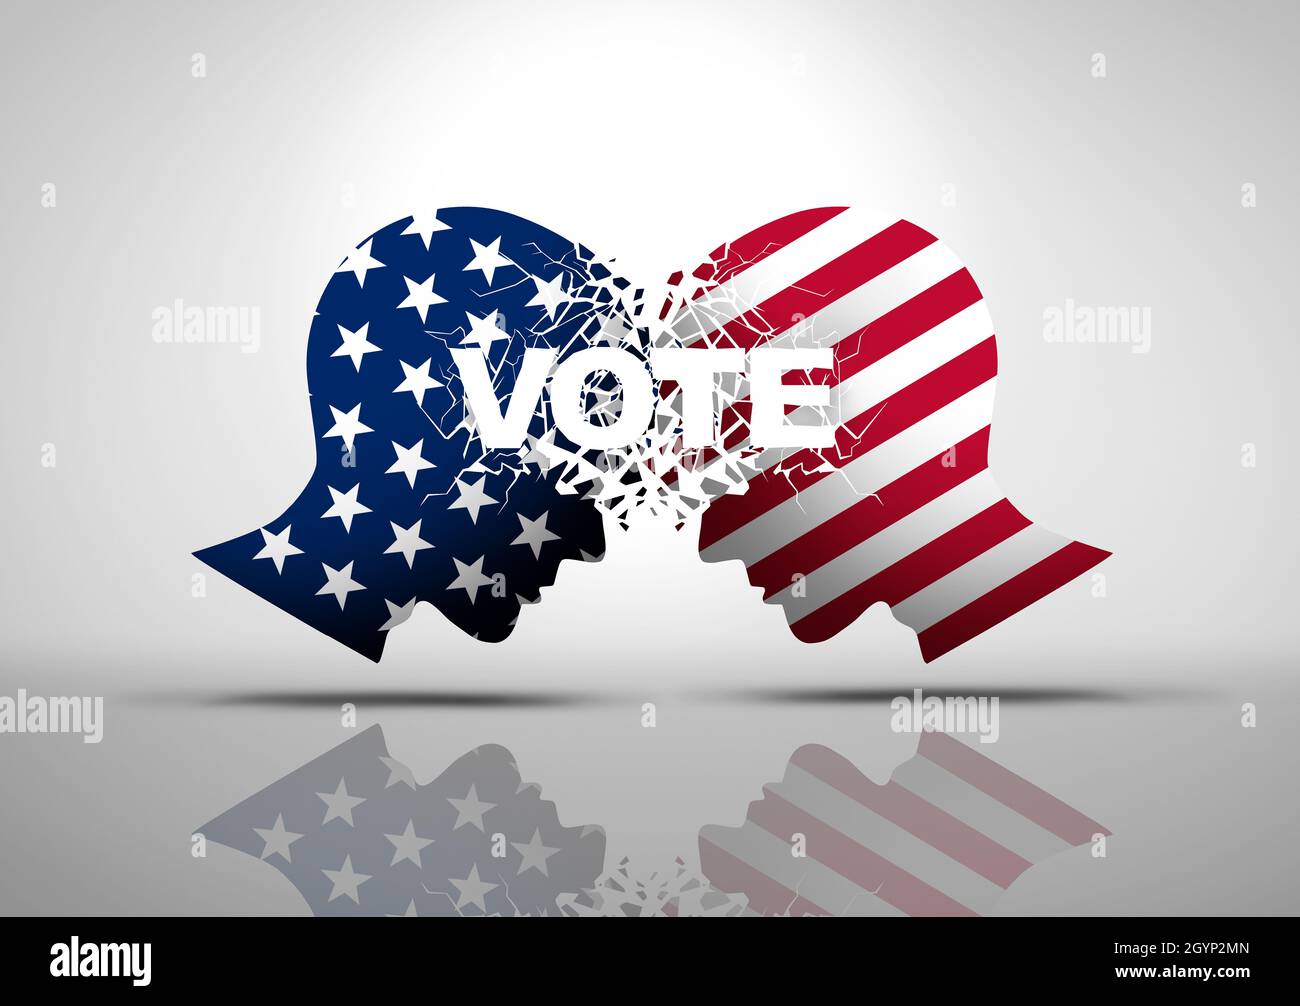 United States election politics and US vote debate or political voting war as an American culture conflict with two opposing sides as conservative. Stock Photo